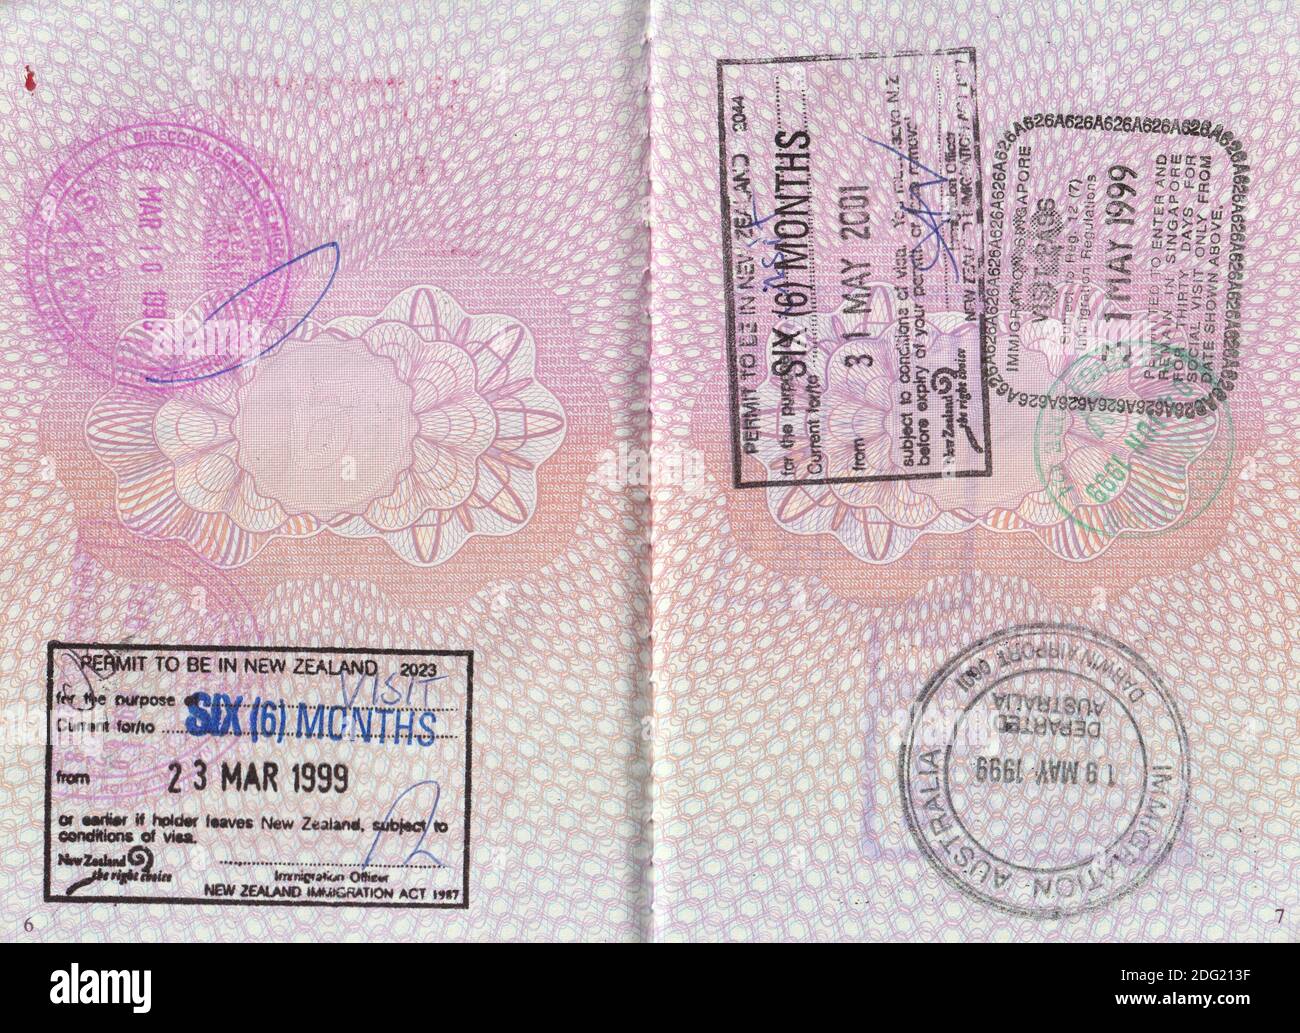 UK passport pages with New Zealand, Australia, Peru and Singapore stamps (see additional info for full details) Stock Photo